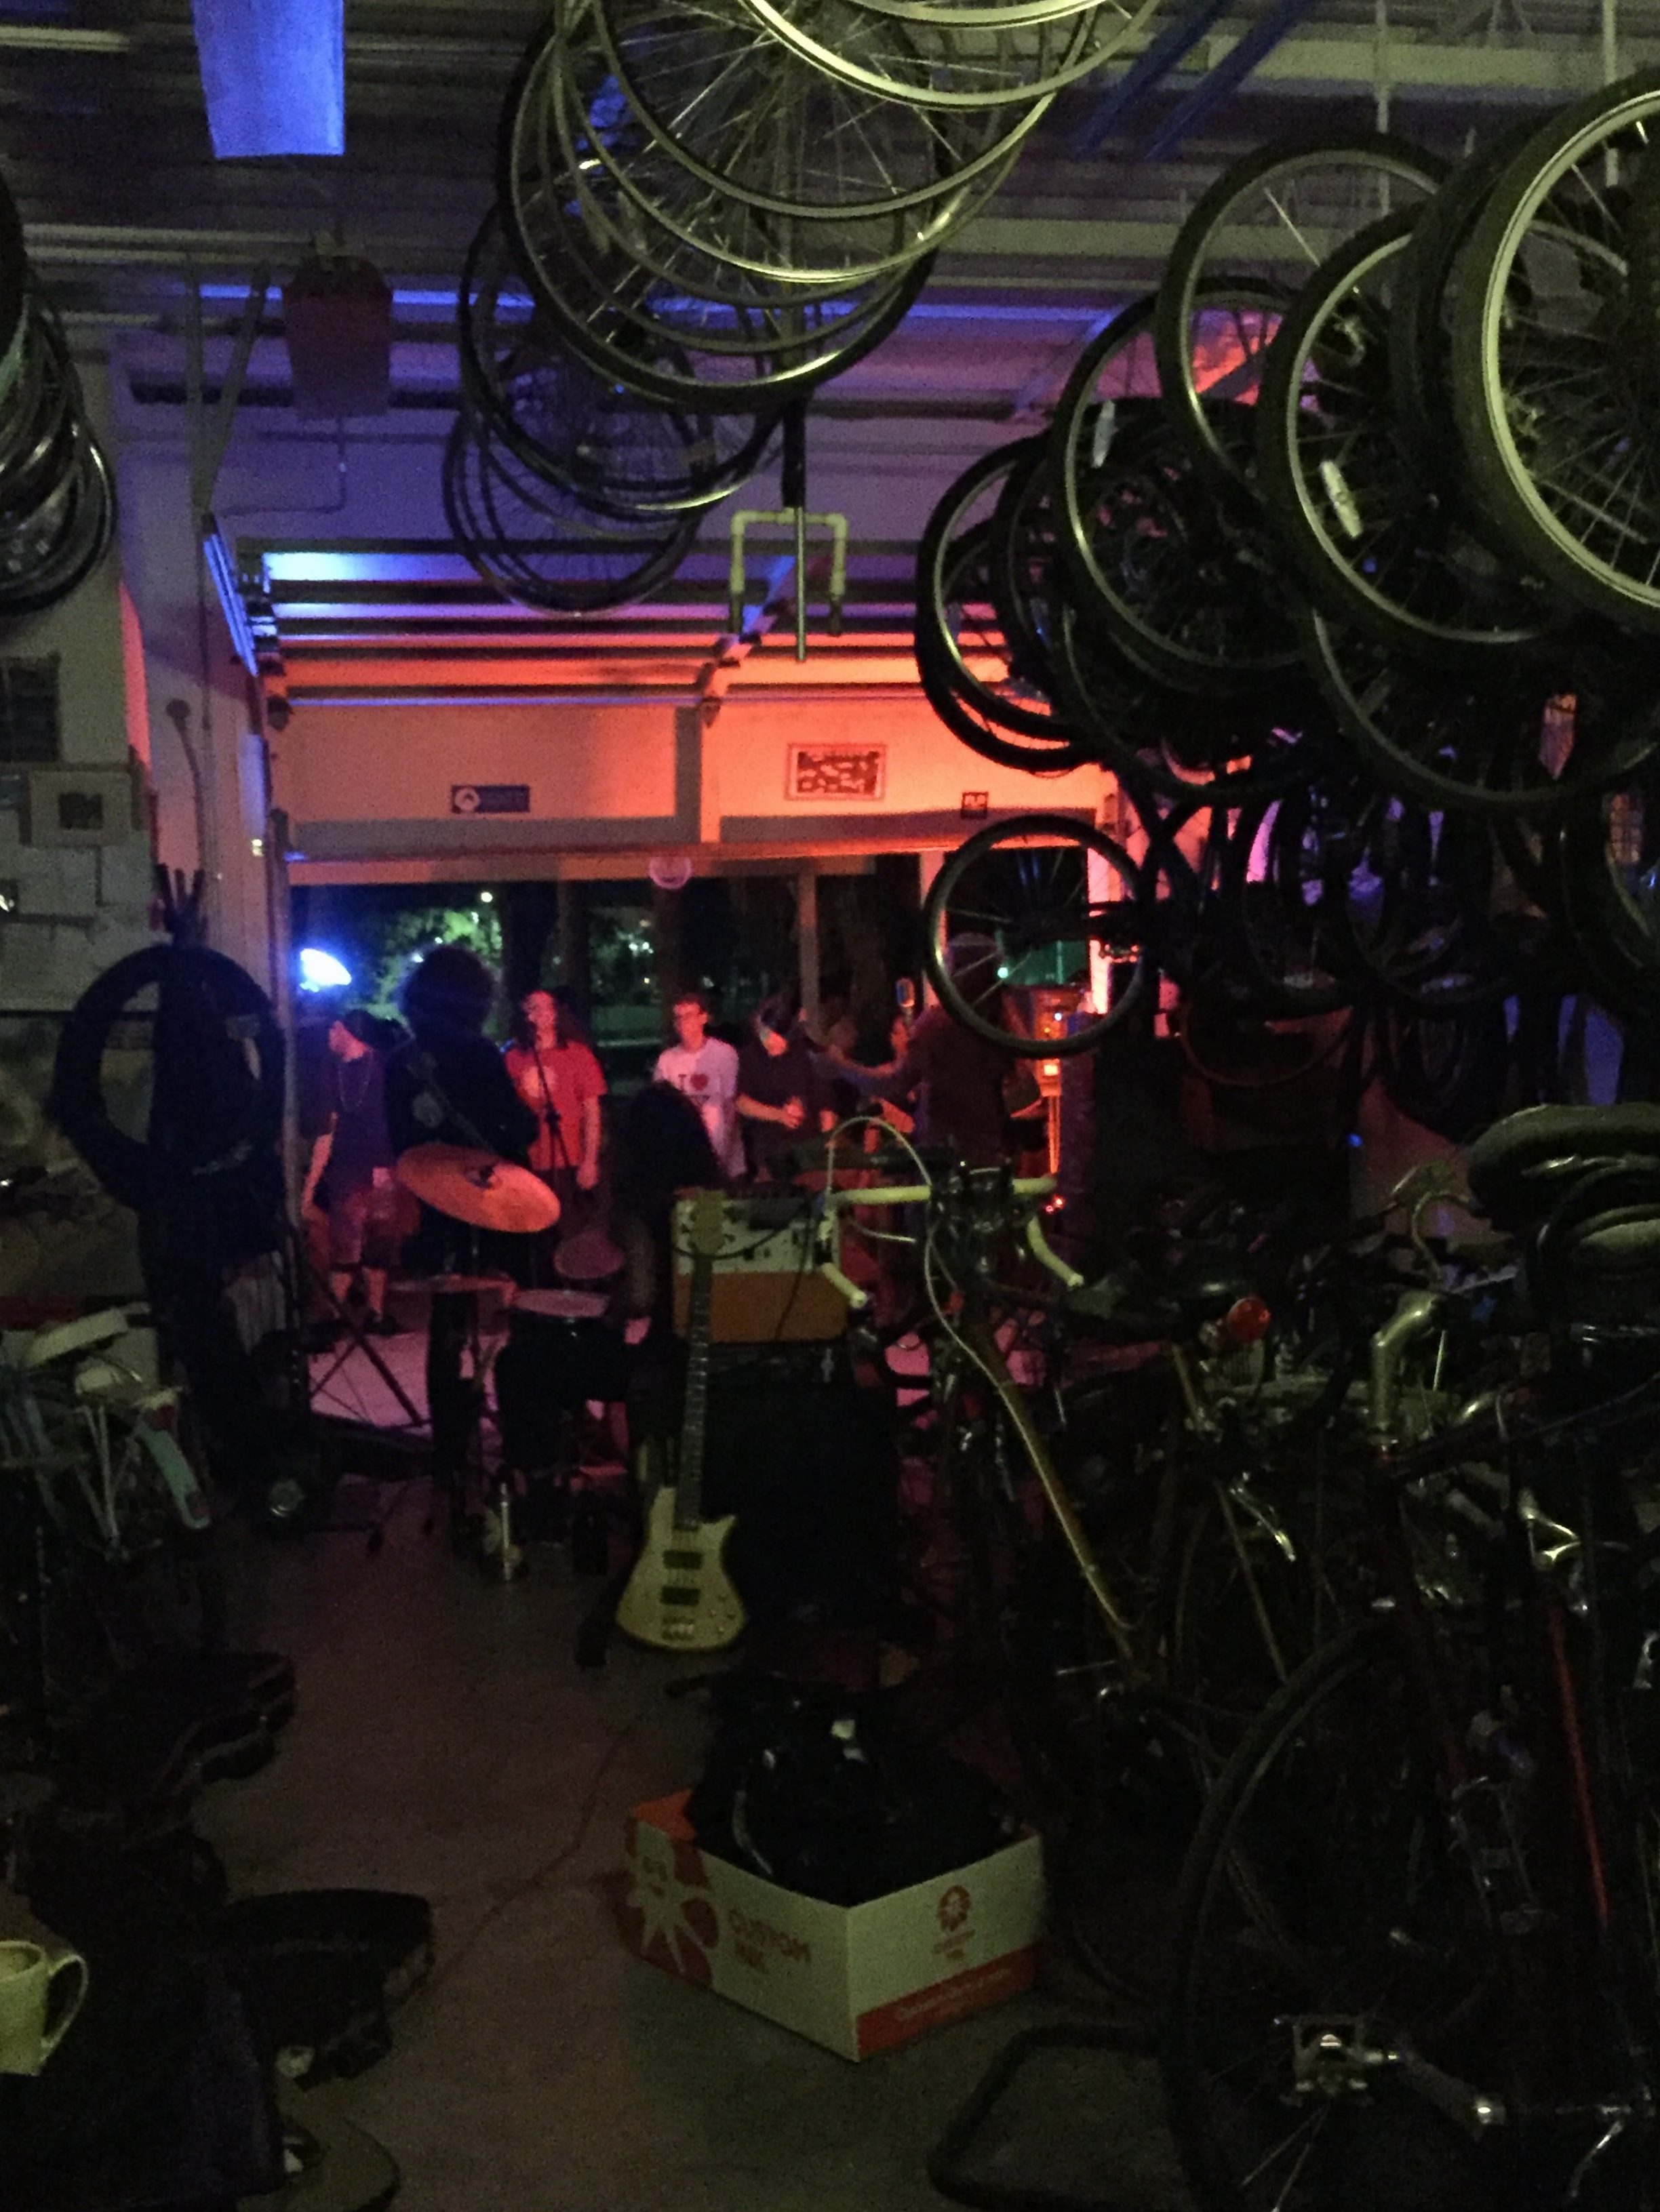 First bike shoppe show of the semester featured student musicians